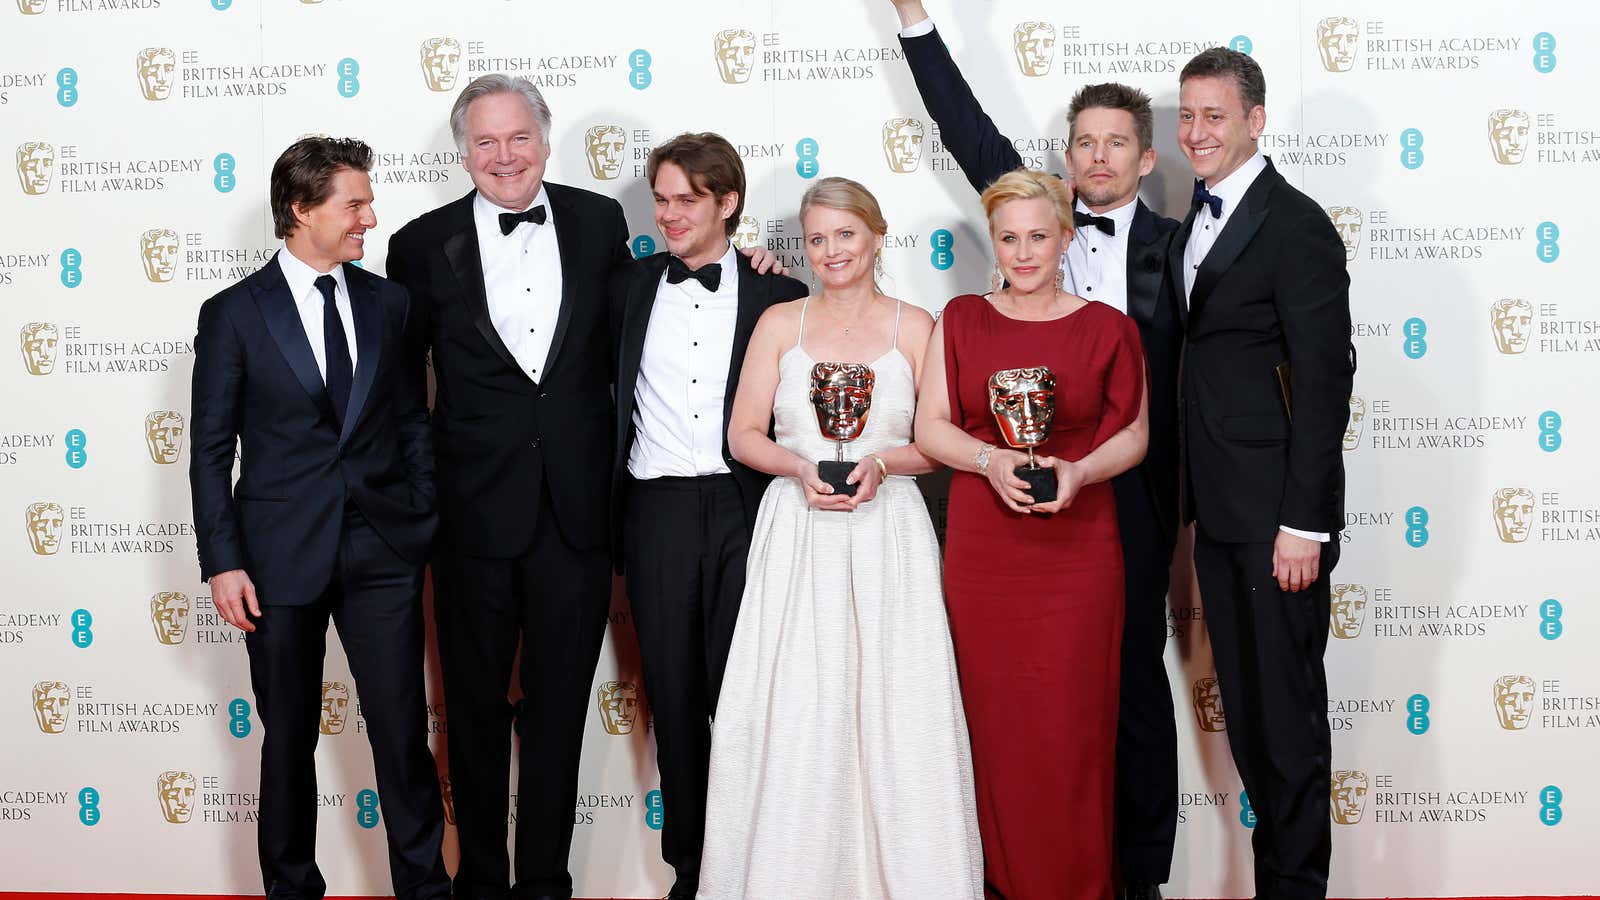 Presenter Tom Cruise (L) celebrates with (2nd L-R) Jonathan Sehring, Ellar Coltrane, Cathleen Sutherland, Patricia Arquette Ethan Hawke, and John Sloss after they won the…